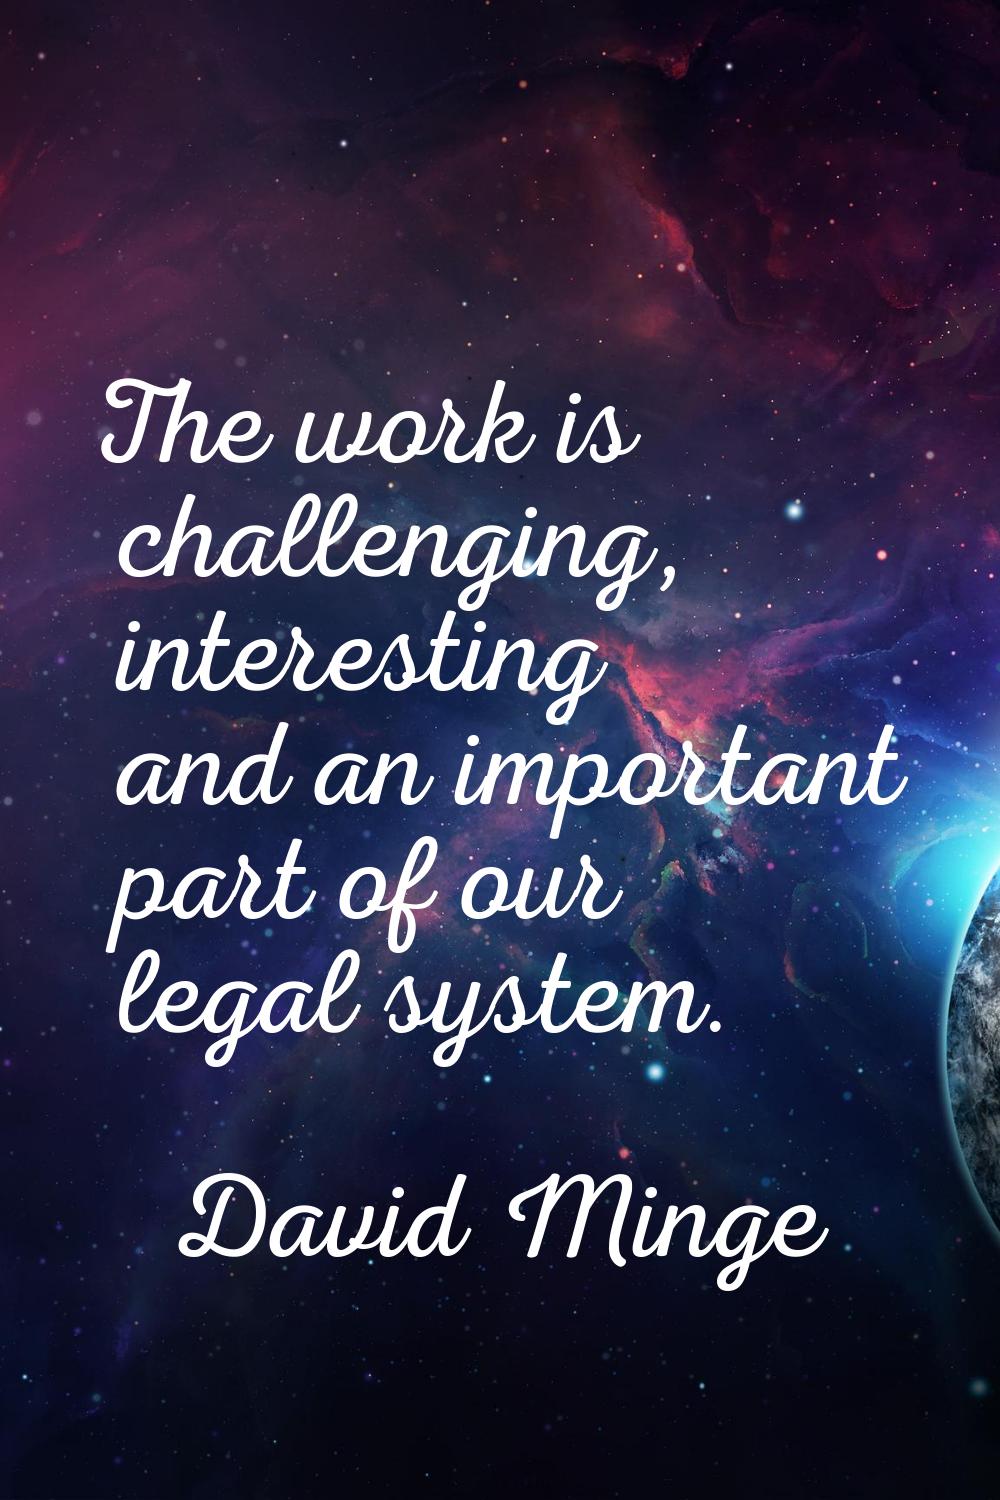 The work is challenging, interesting and an important part of our legal system.